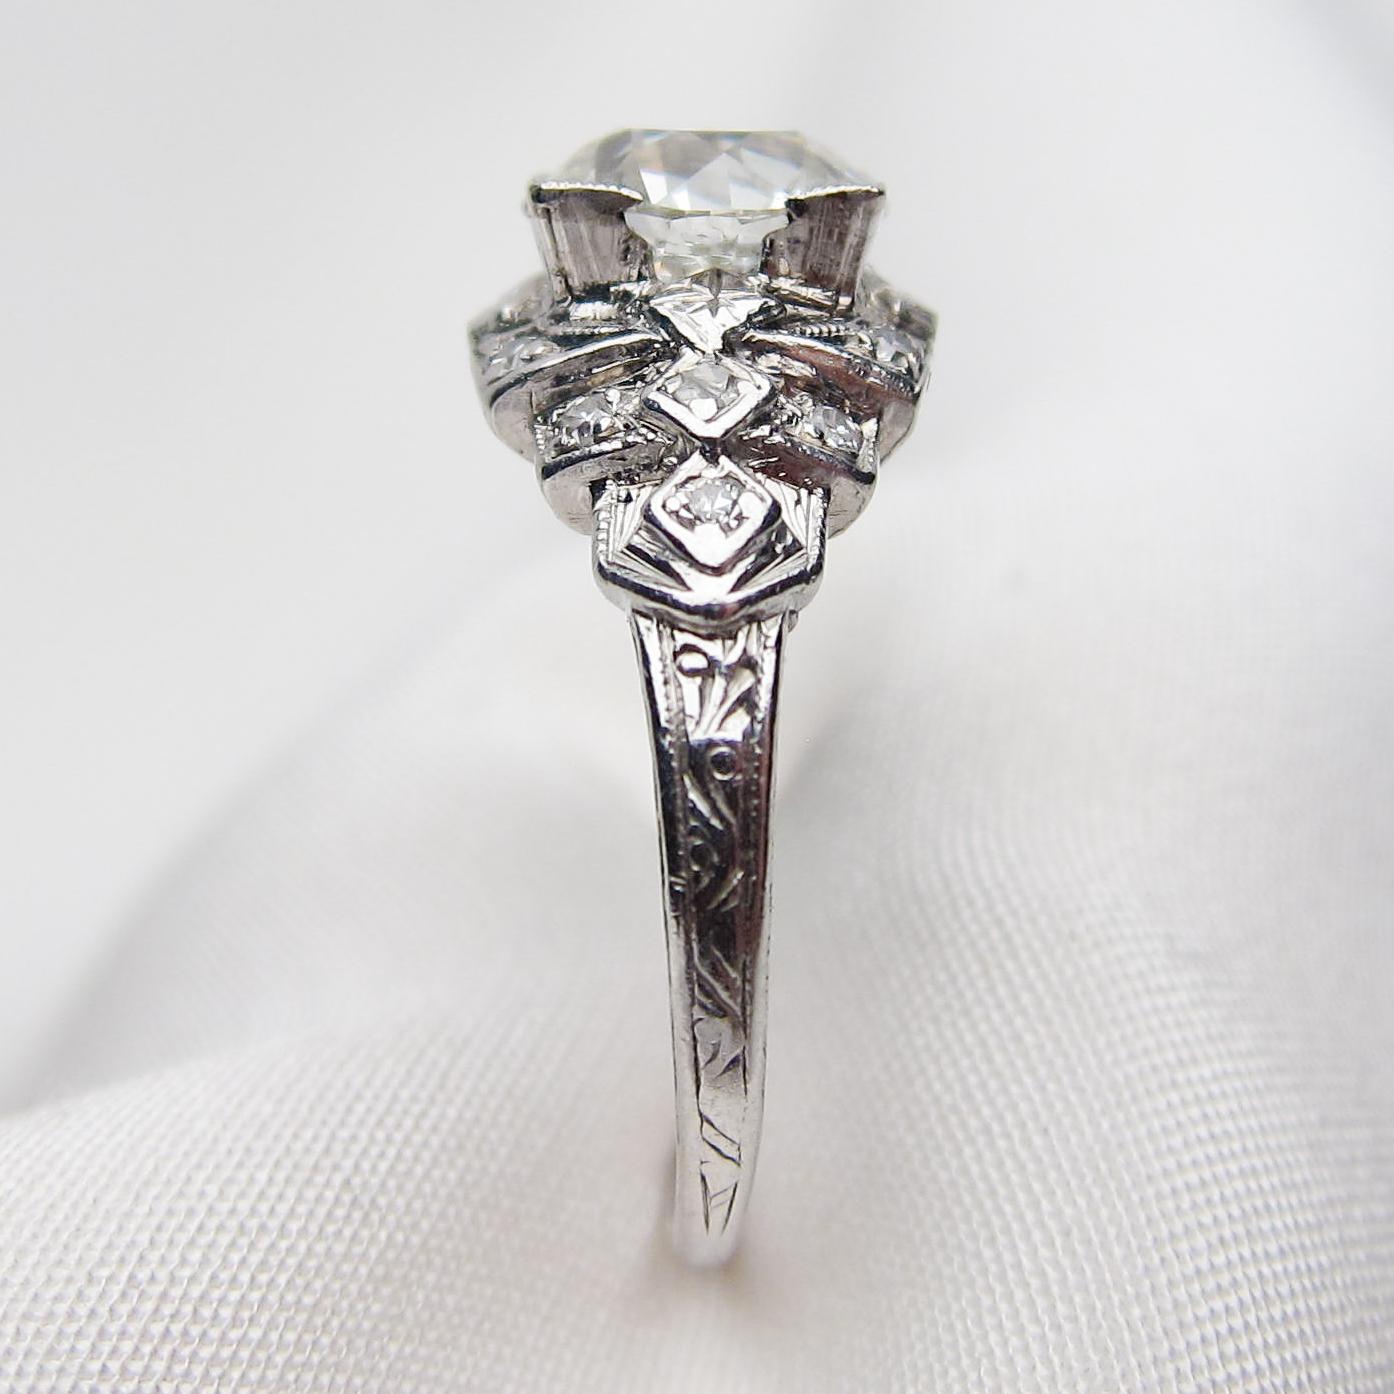 Art Deco Era 1.86 Ct Old European-Cut Diamond and Platinum Engagement Ring In Excellent Condition For Sale In Seattle, WA